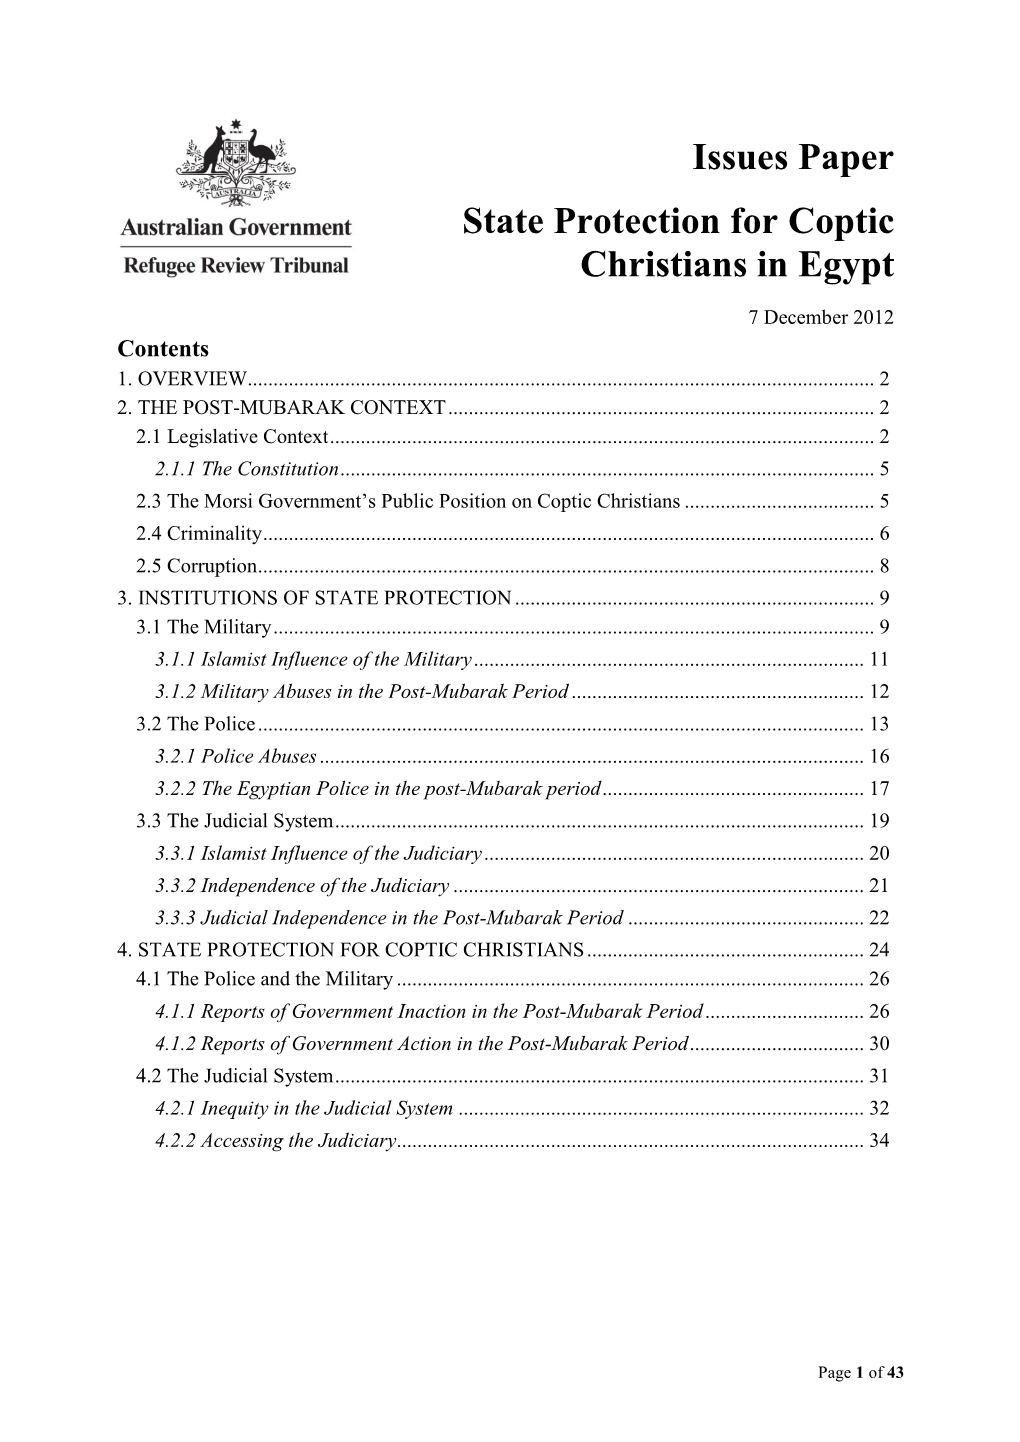 State Protection for Coptic Christians in Egypt in the Post-Mubarak Period